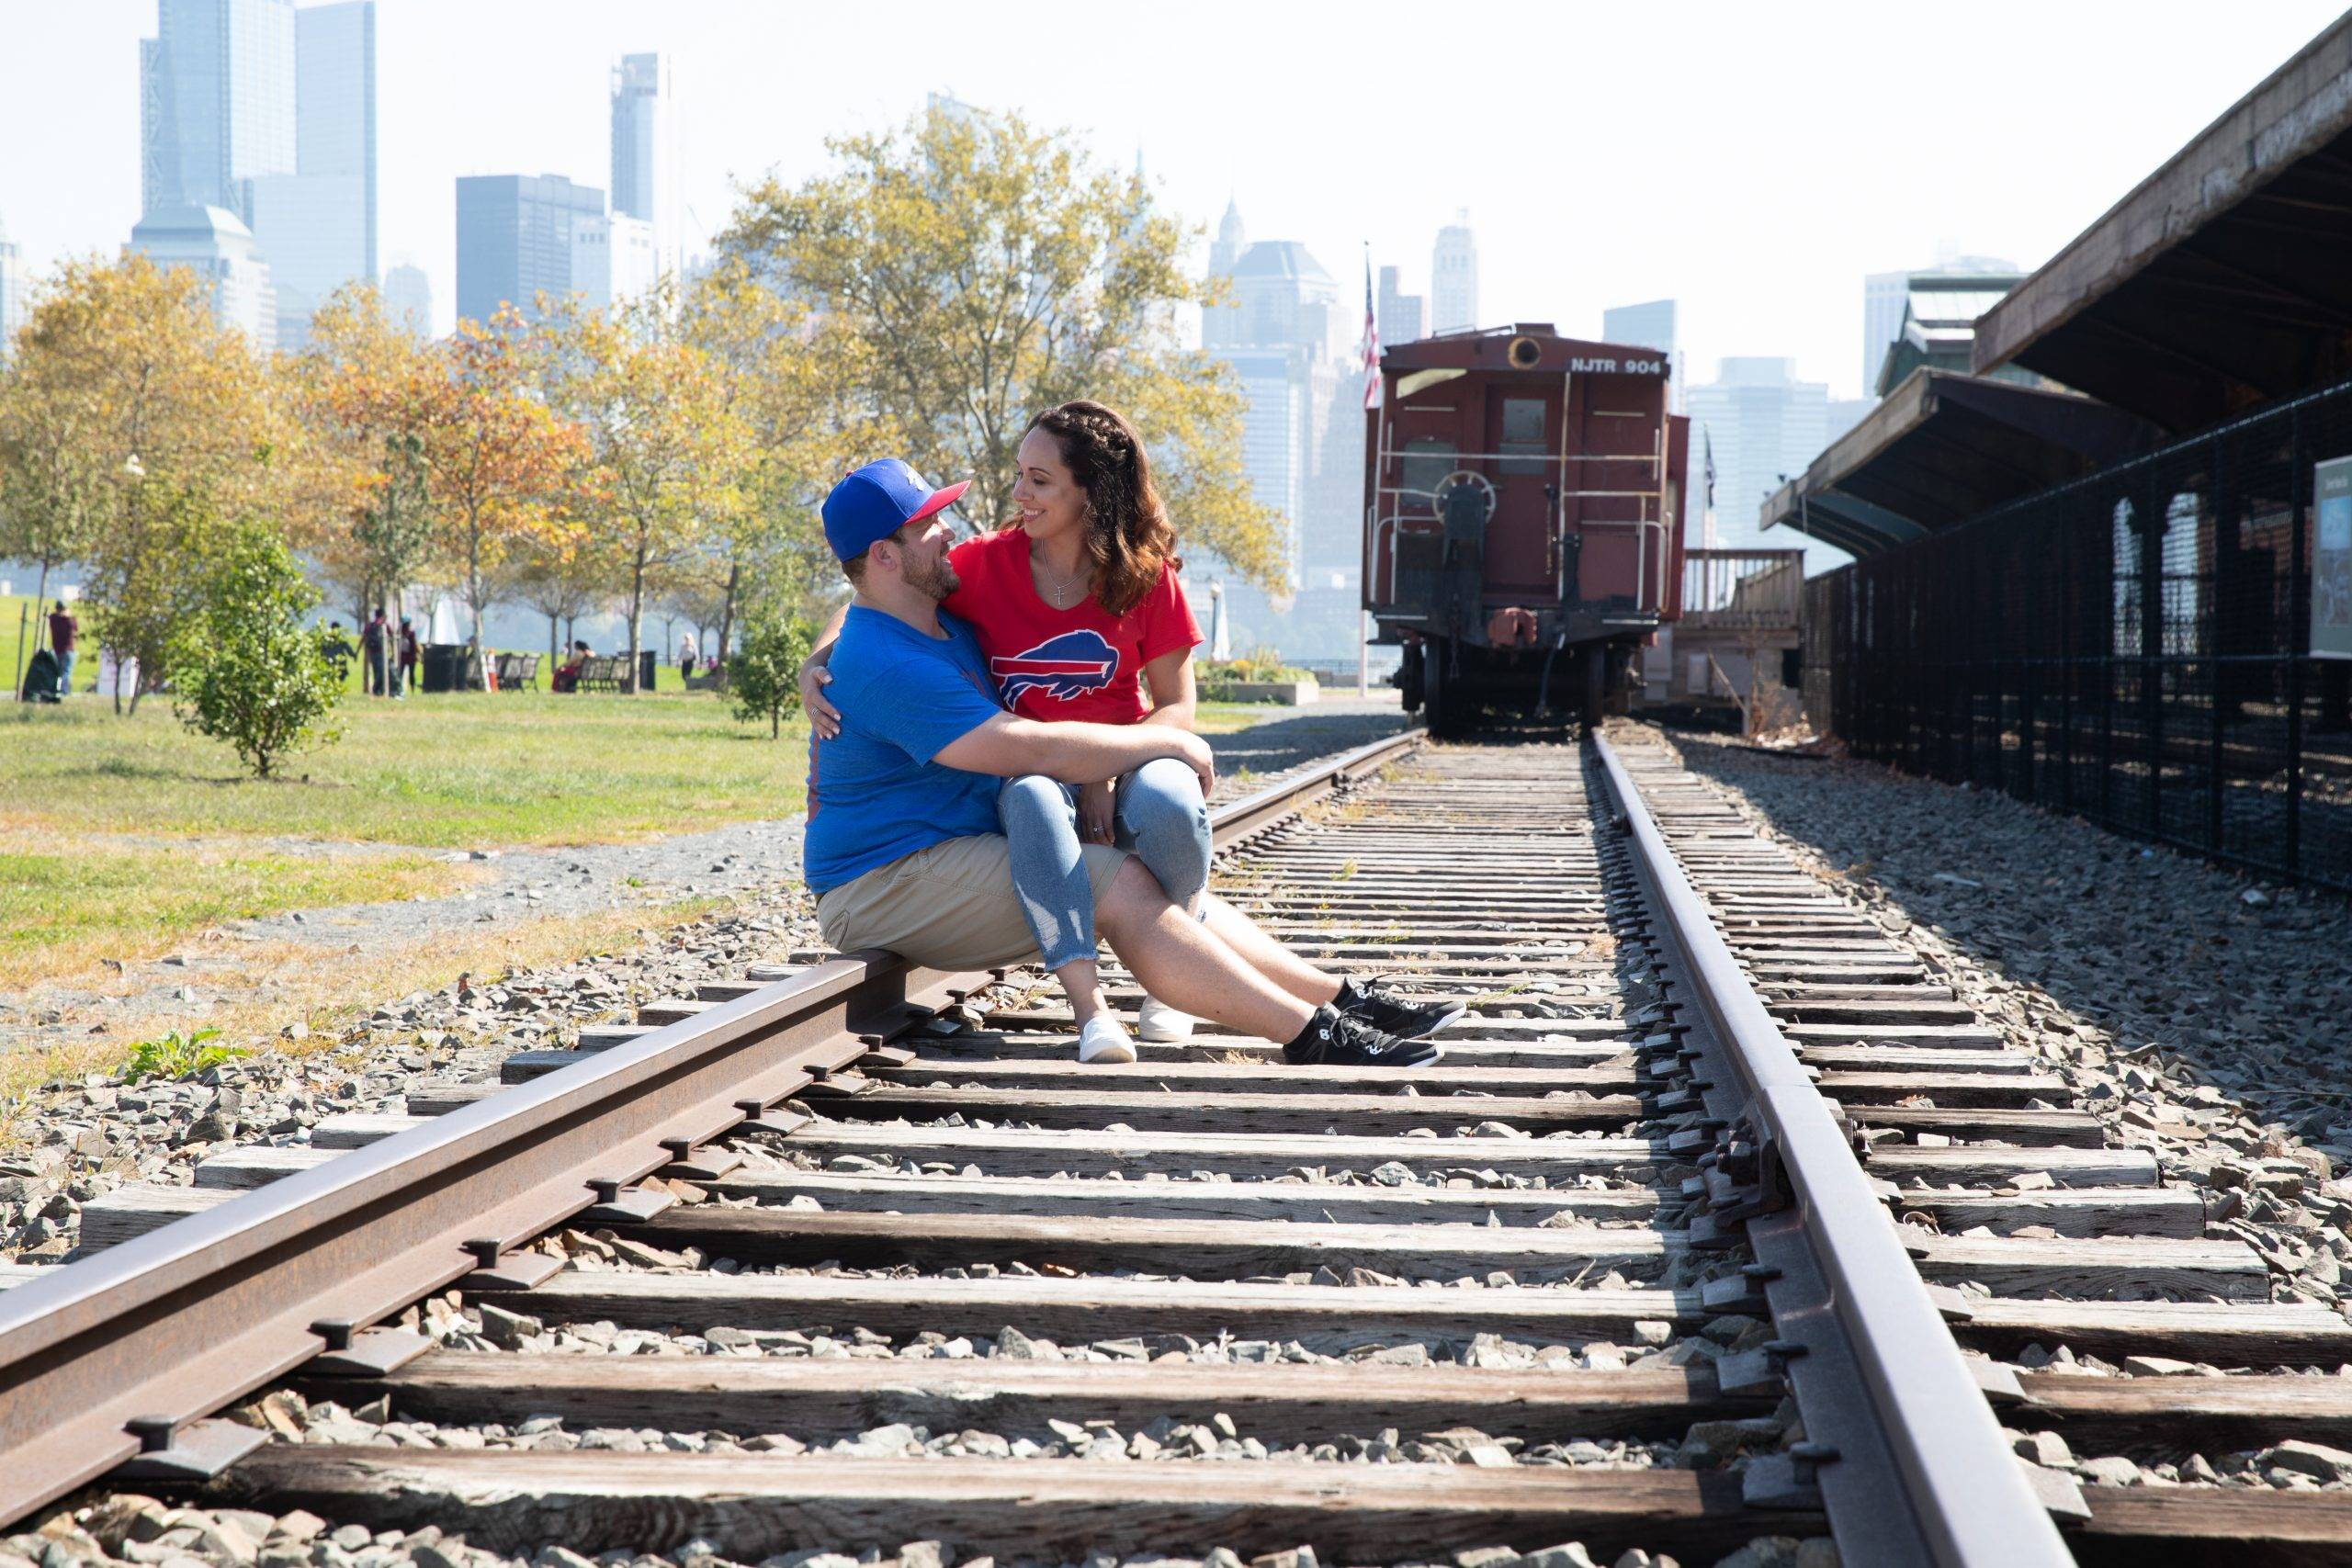 A man and woman sitting on train tracks.